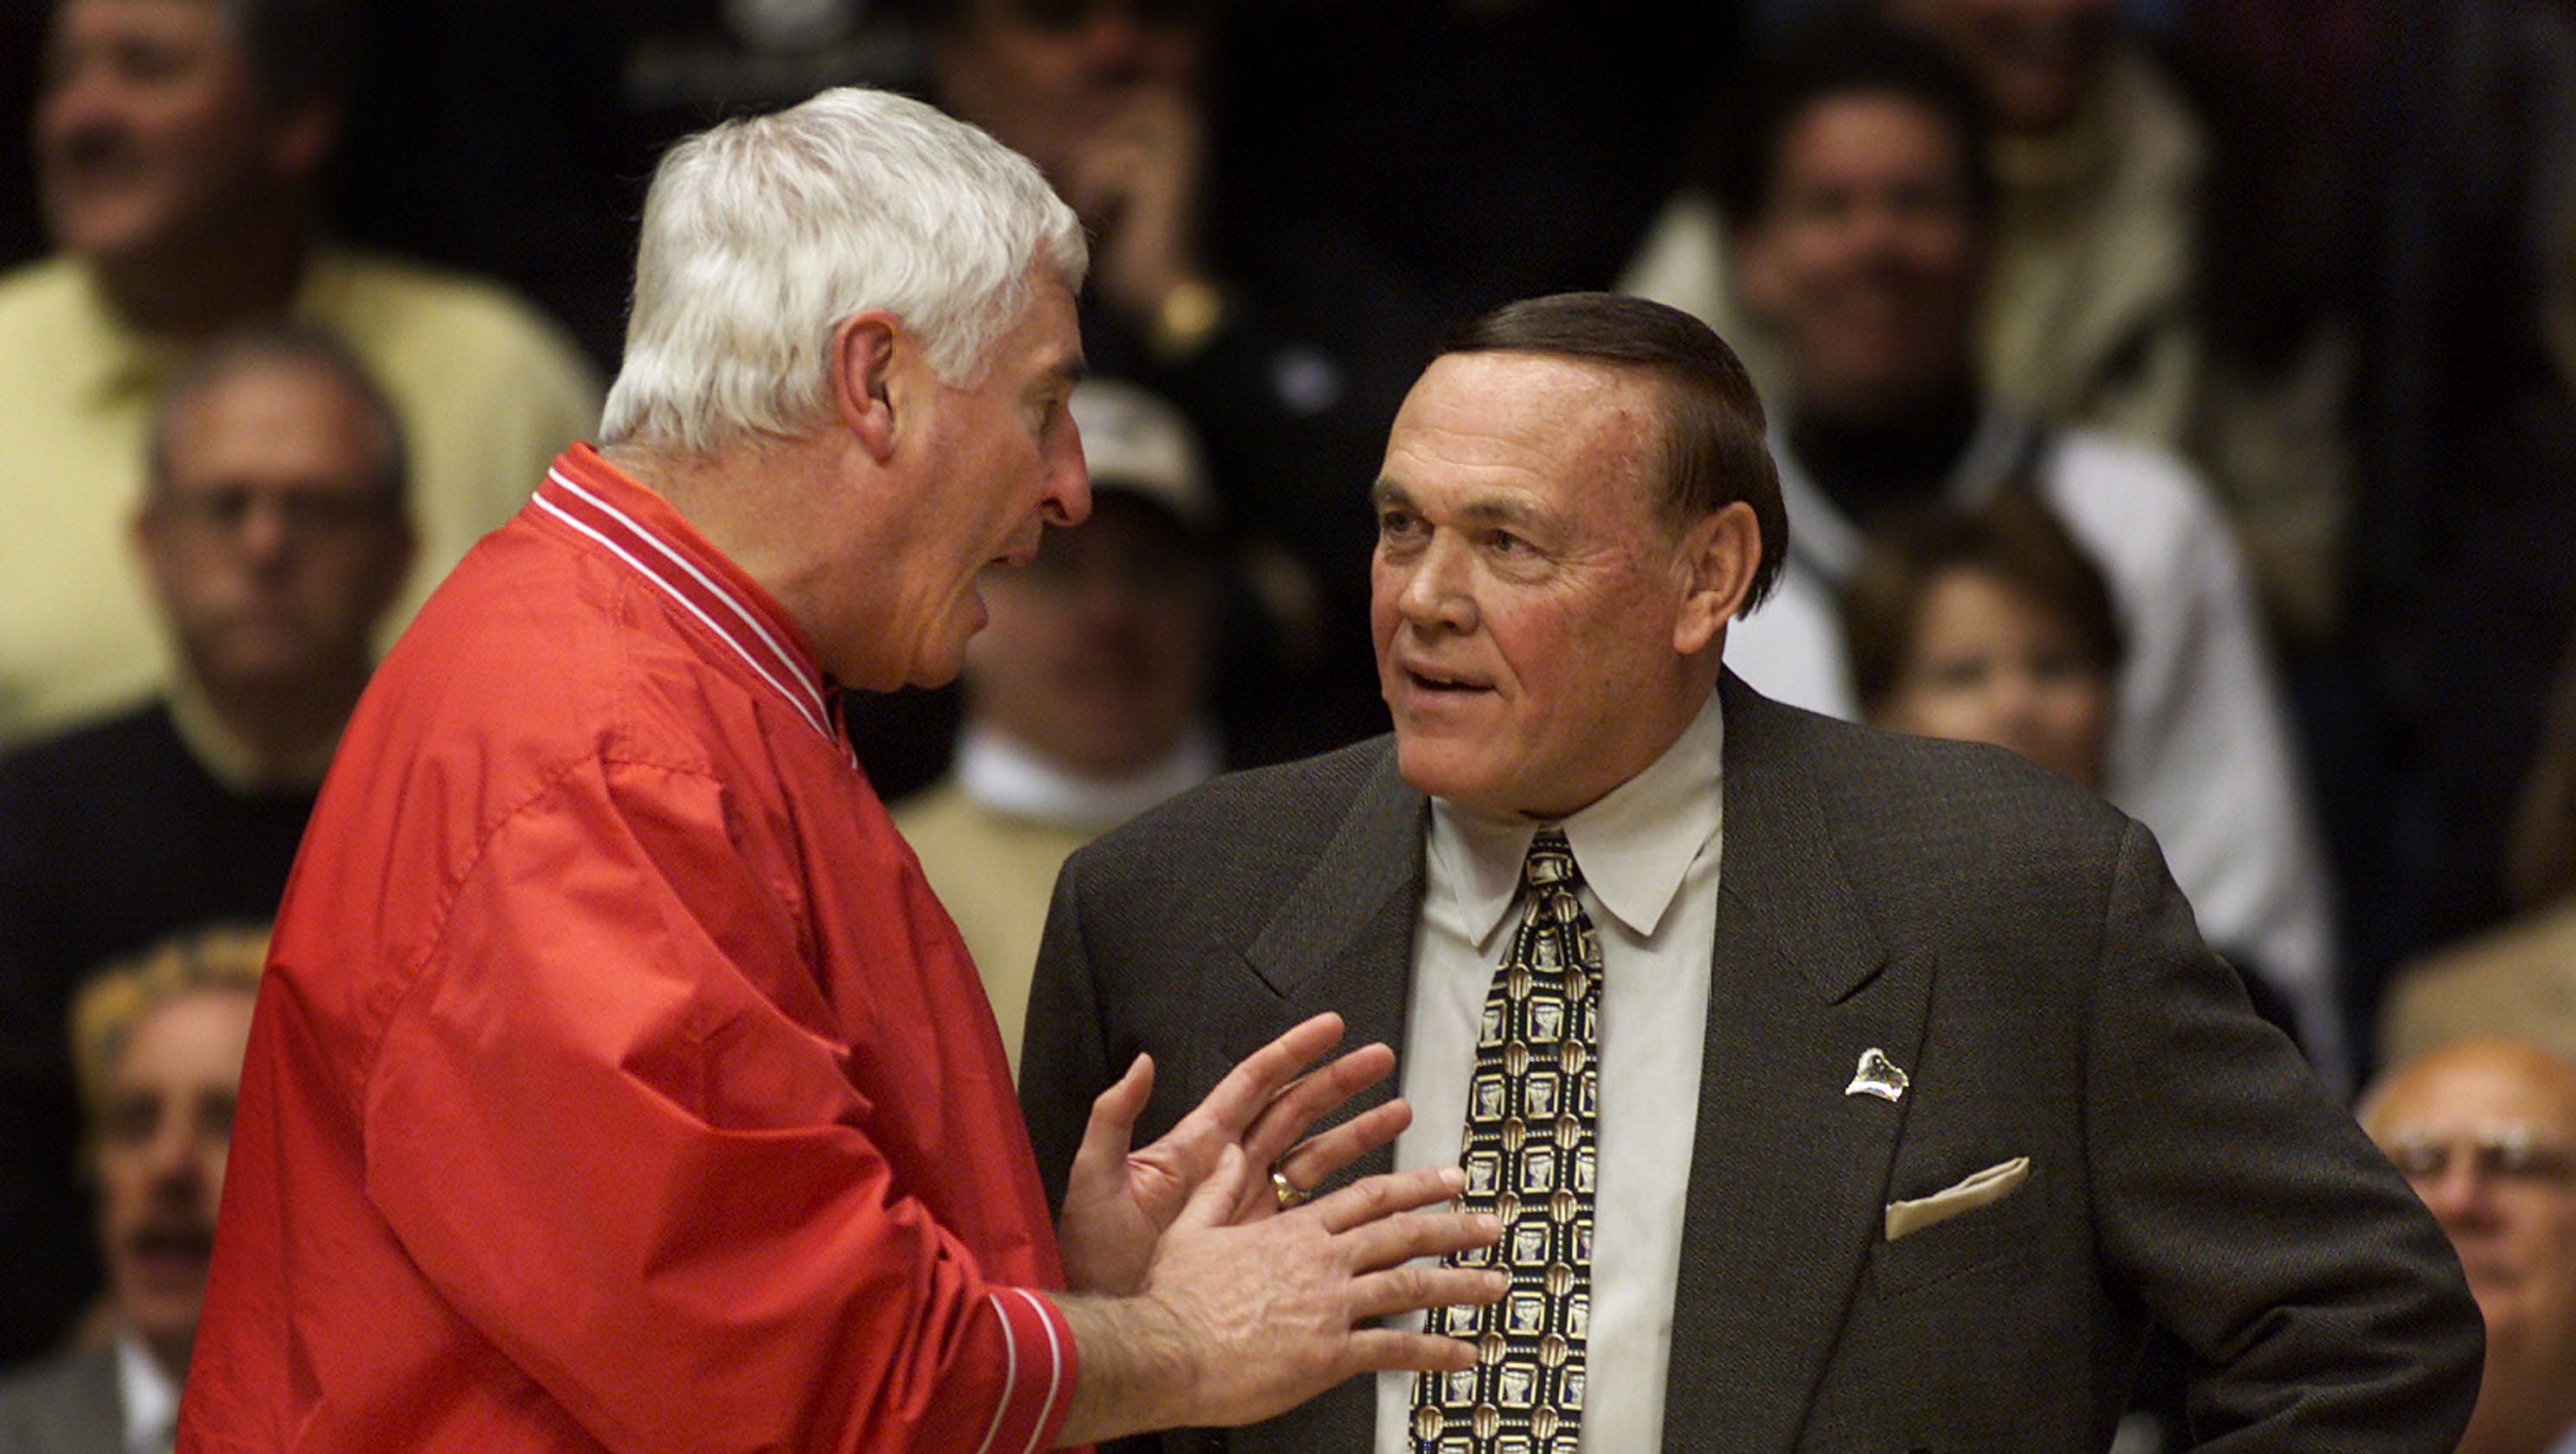 Gene Keady can still love Purdue, why does Bob Knight have to hate IU?